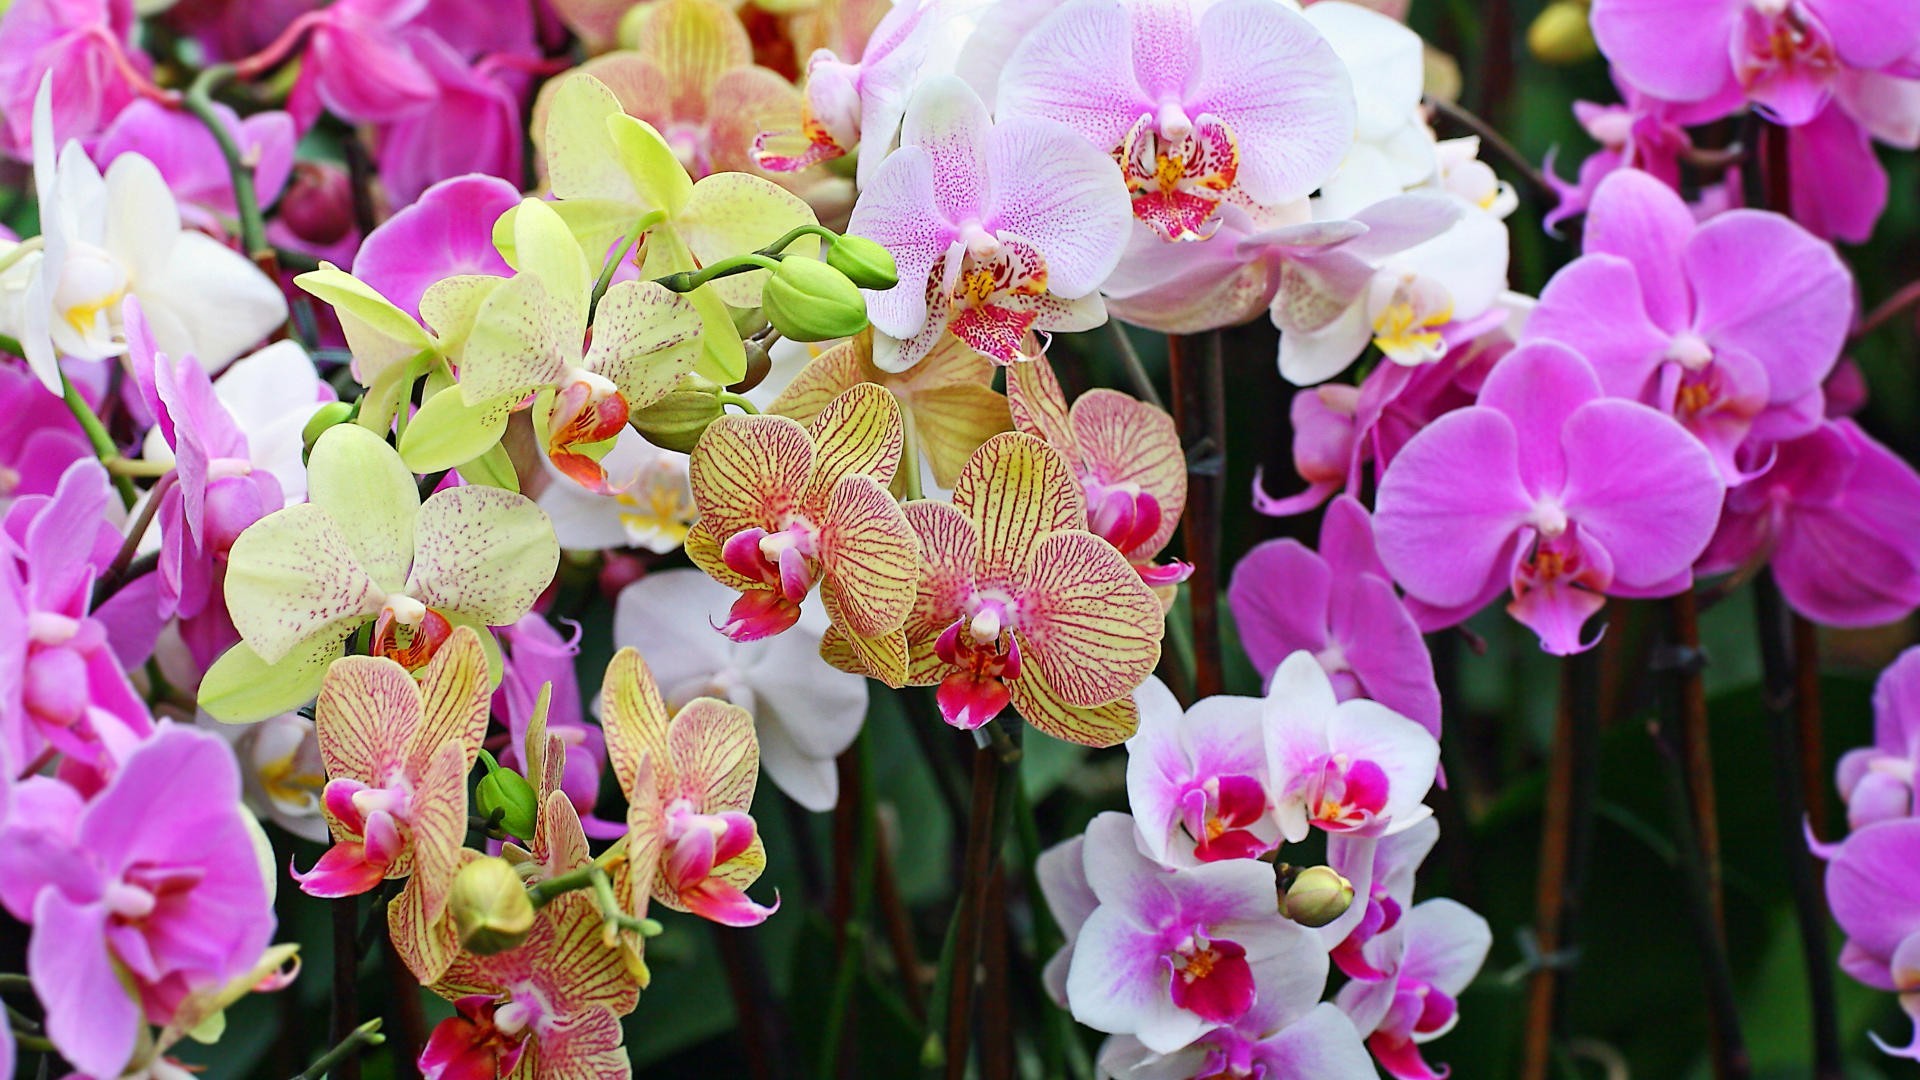 Colorful Orchids